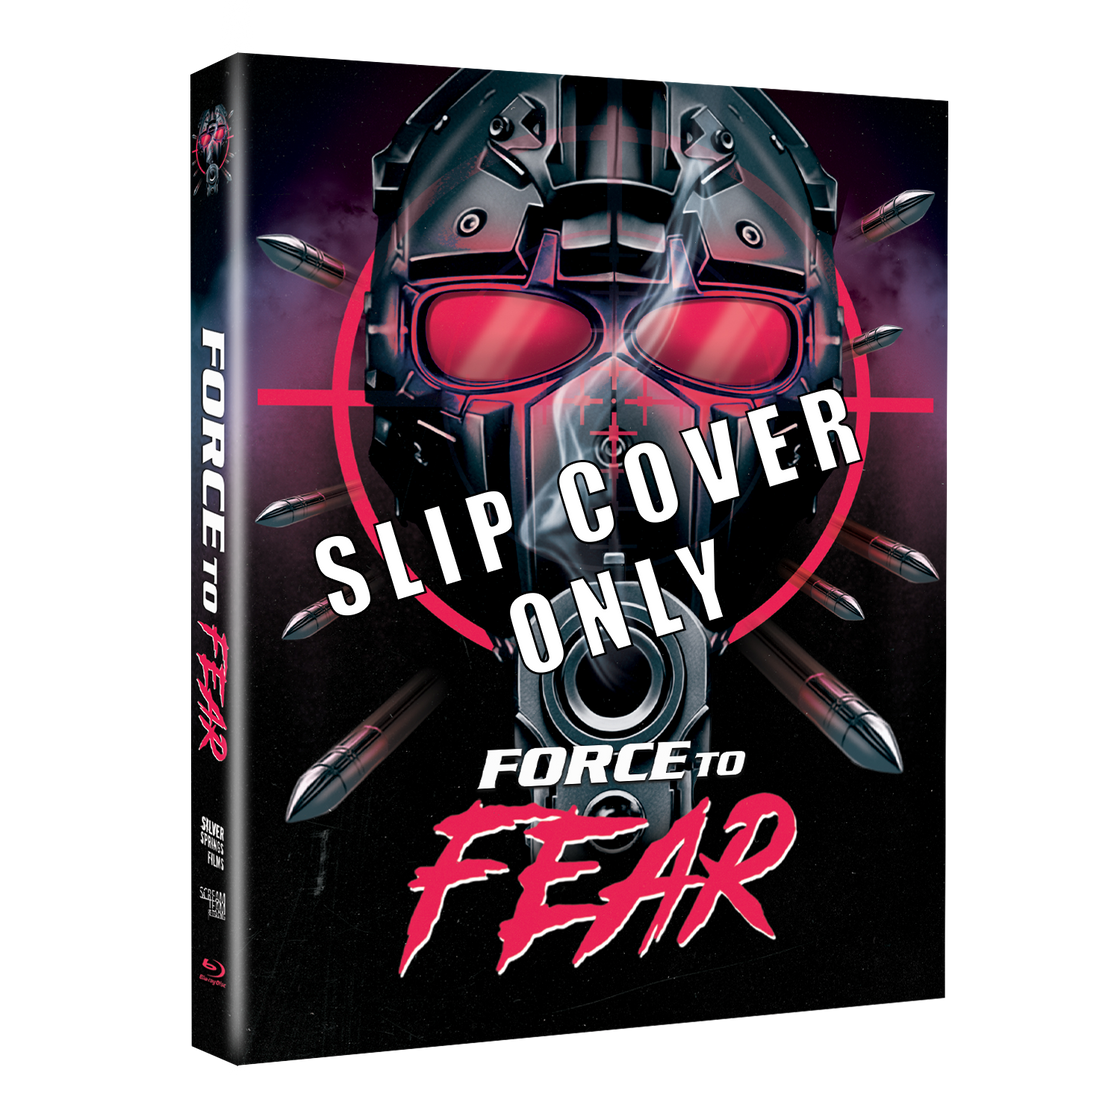 Force to Fear - Slip Cover ONLY